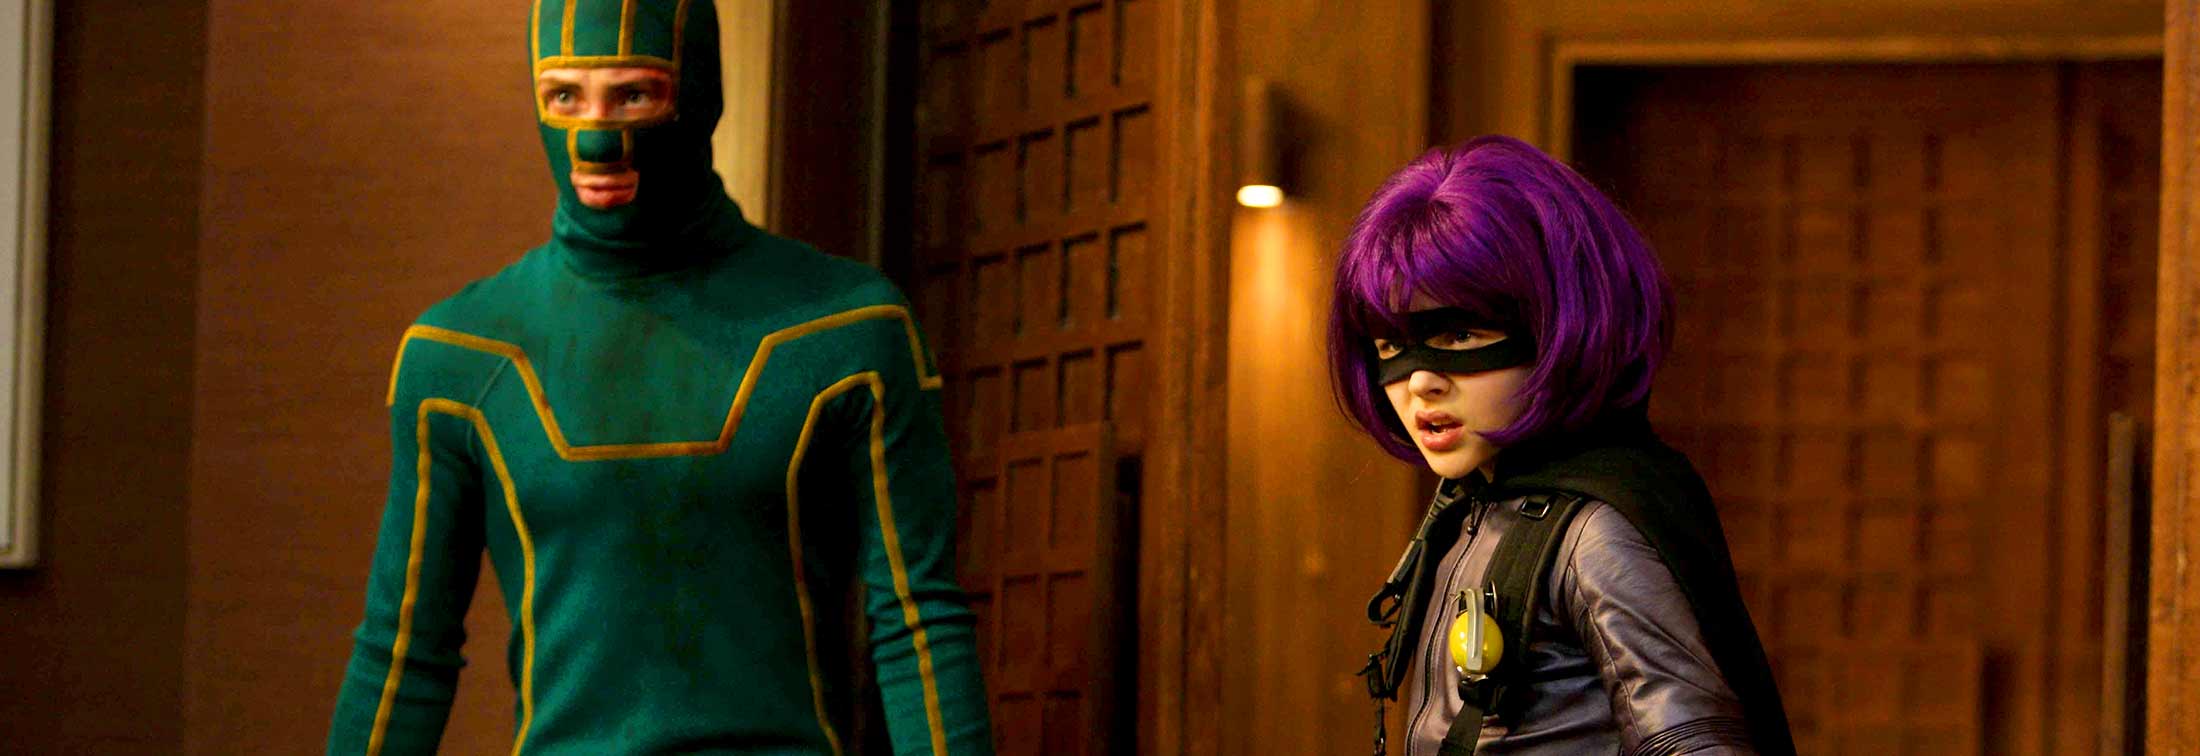 Kick-Ass 10-Year Anniversary - The love letter to superheroes that changed everything